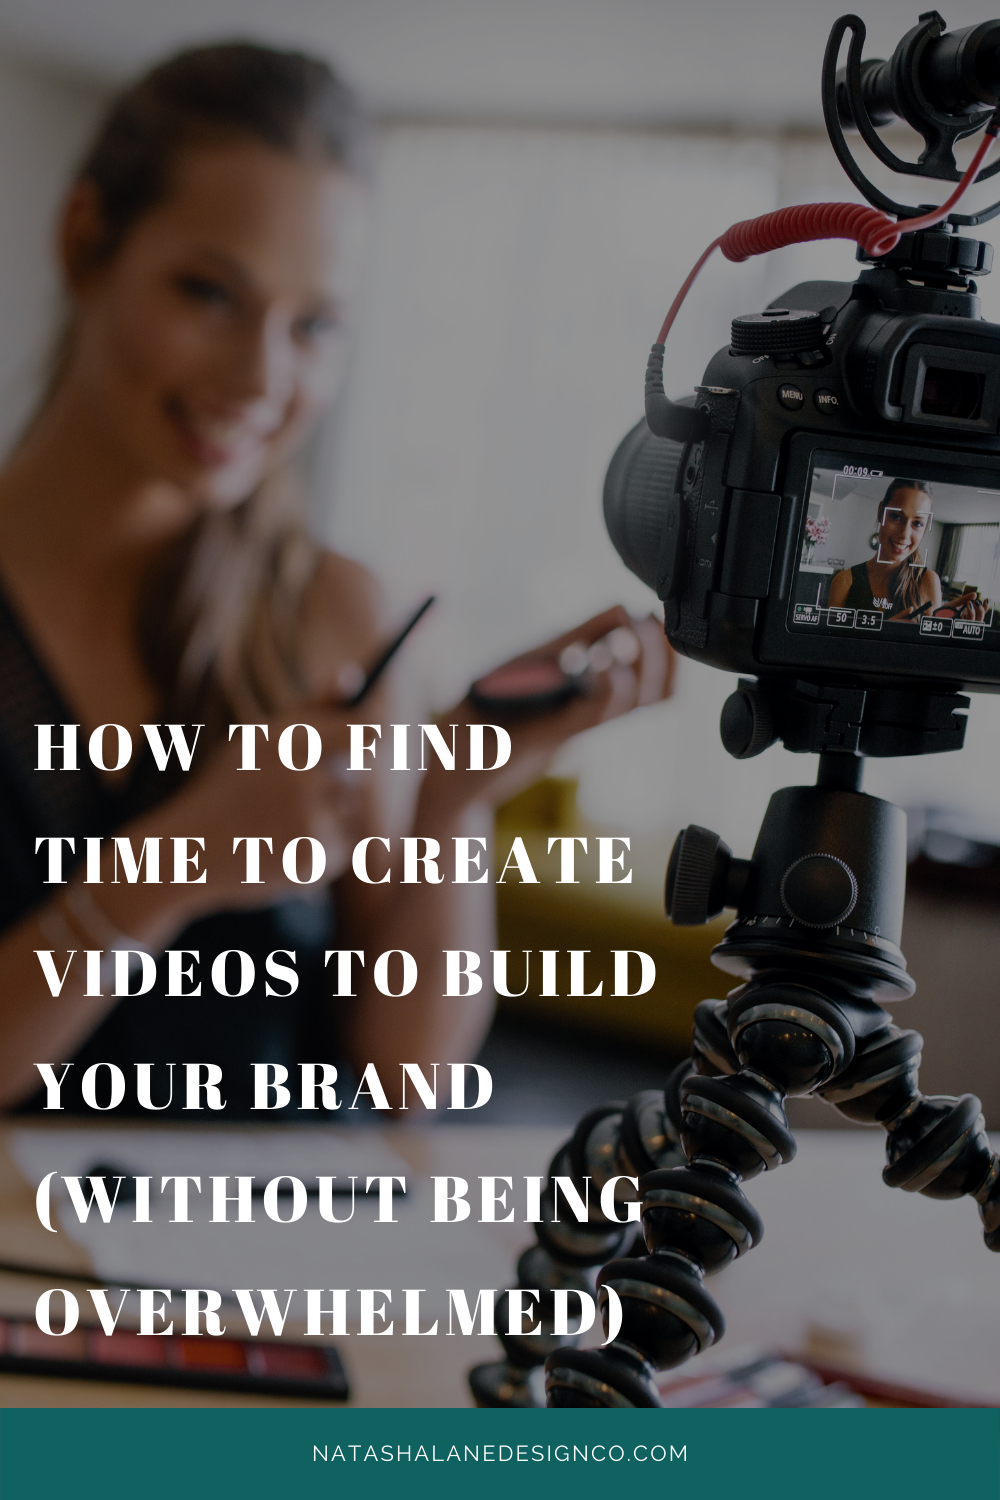 How to find time to create videos